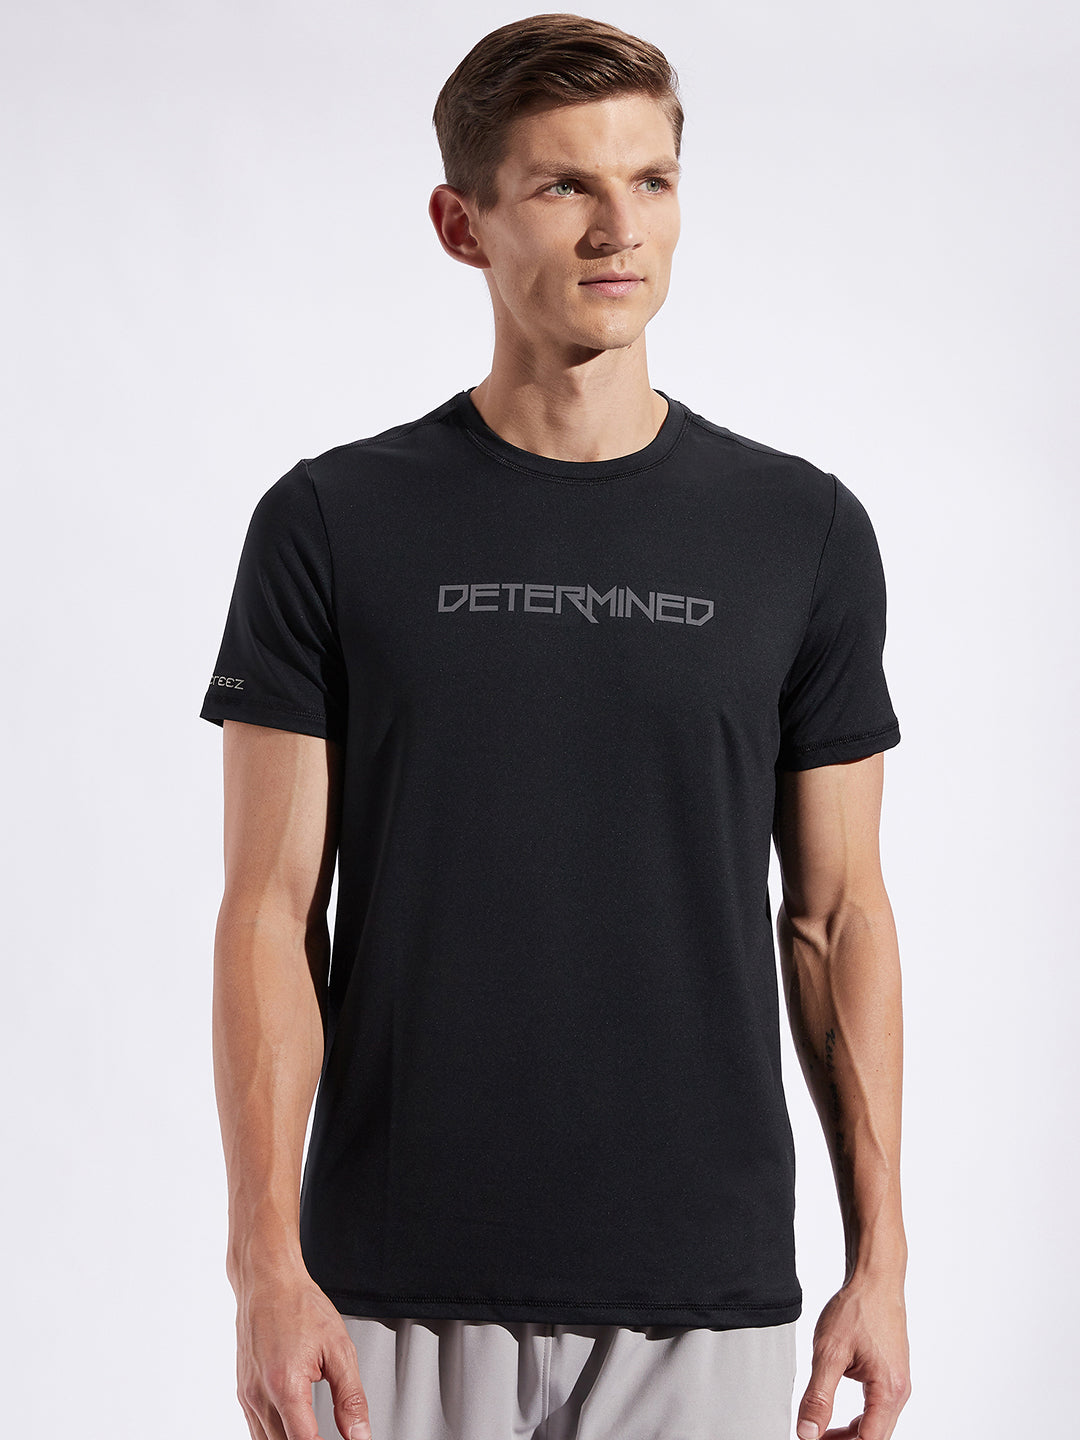 Determined Stretchable T-shirt 1